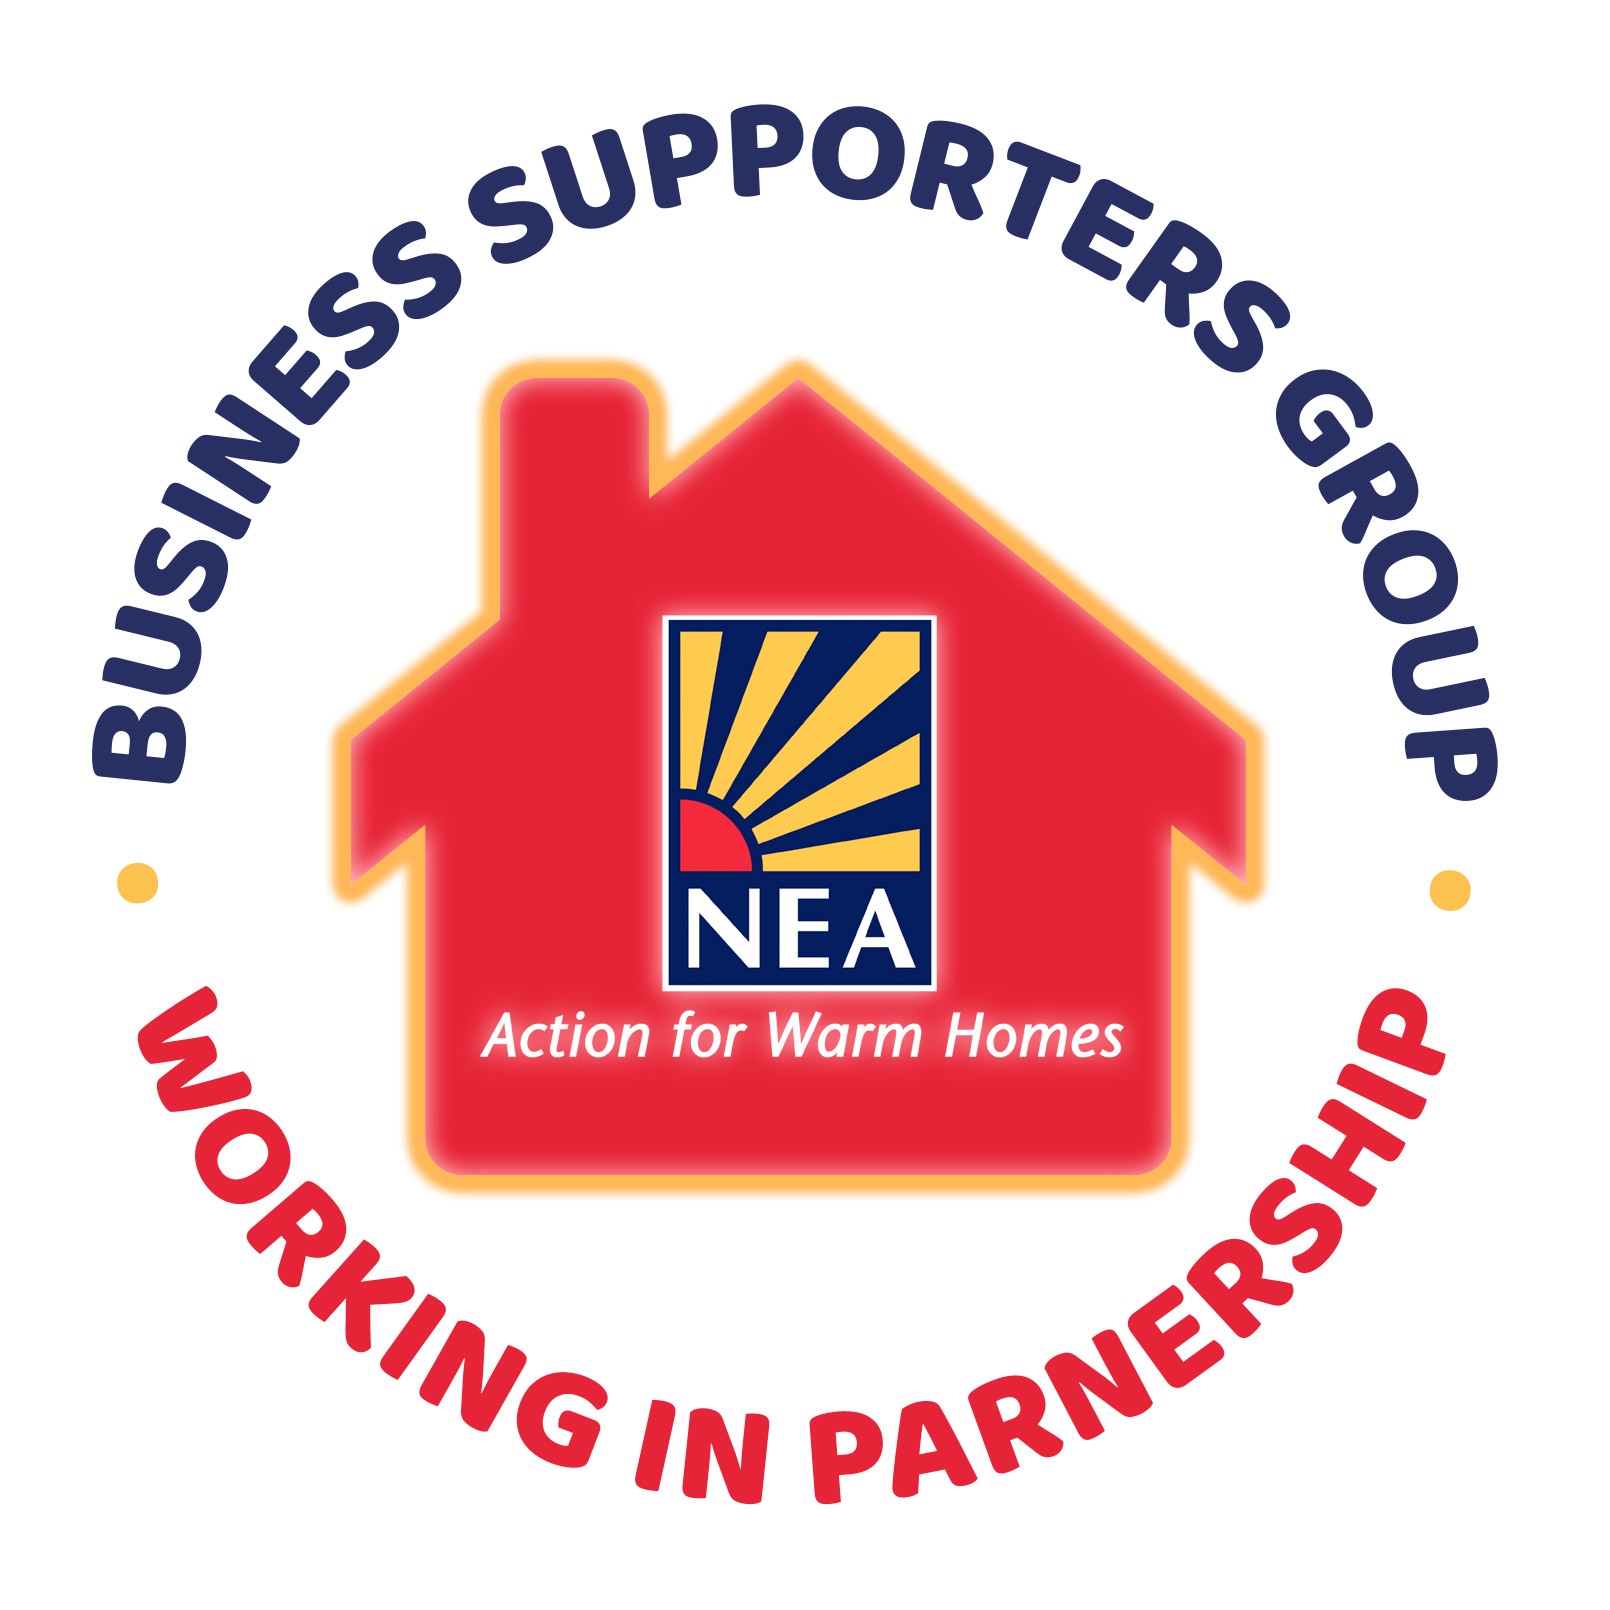 Business Supporters Group - Working In Partnership